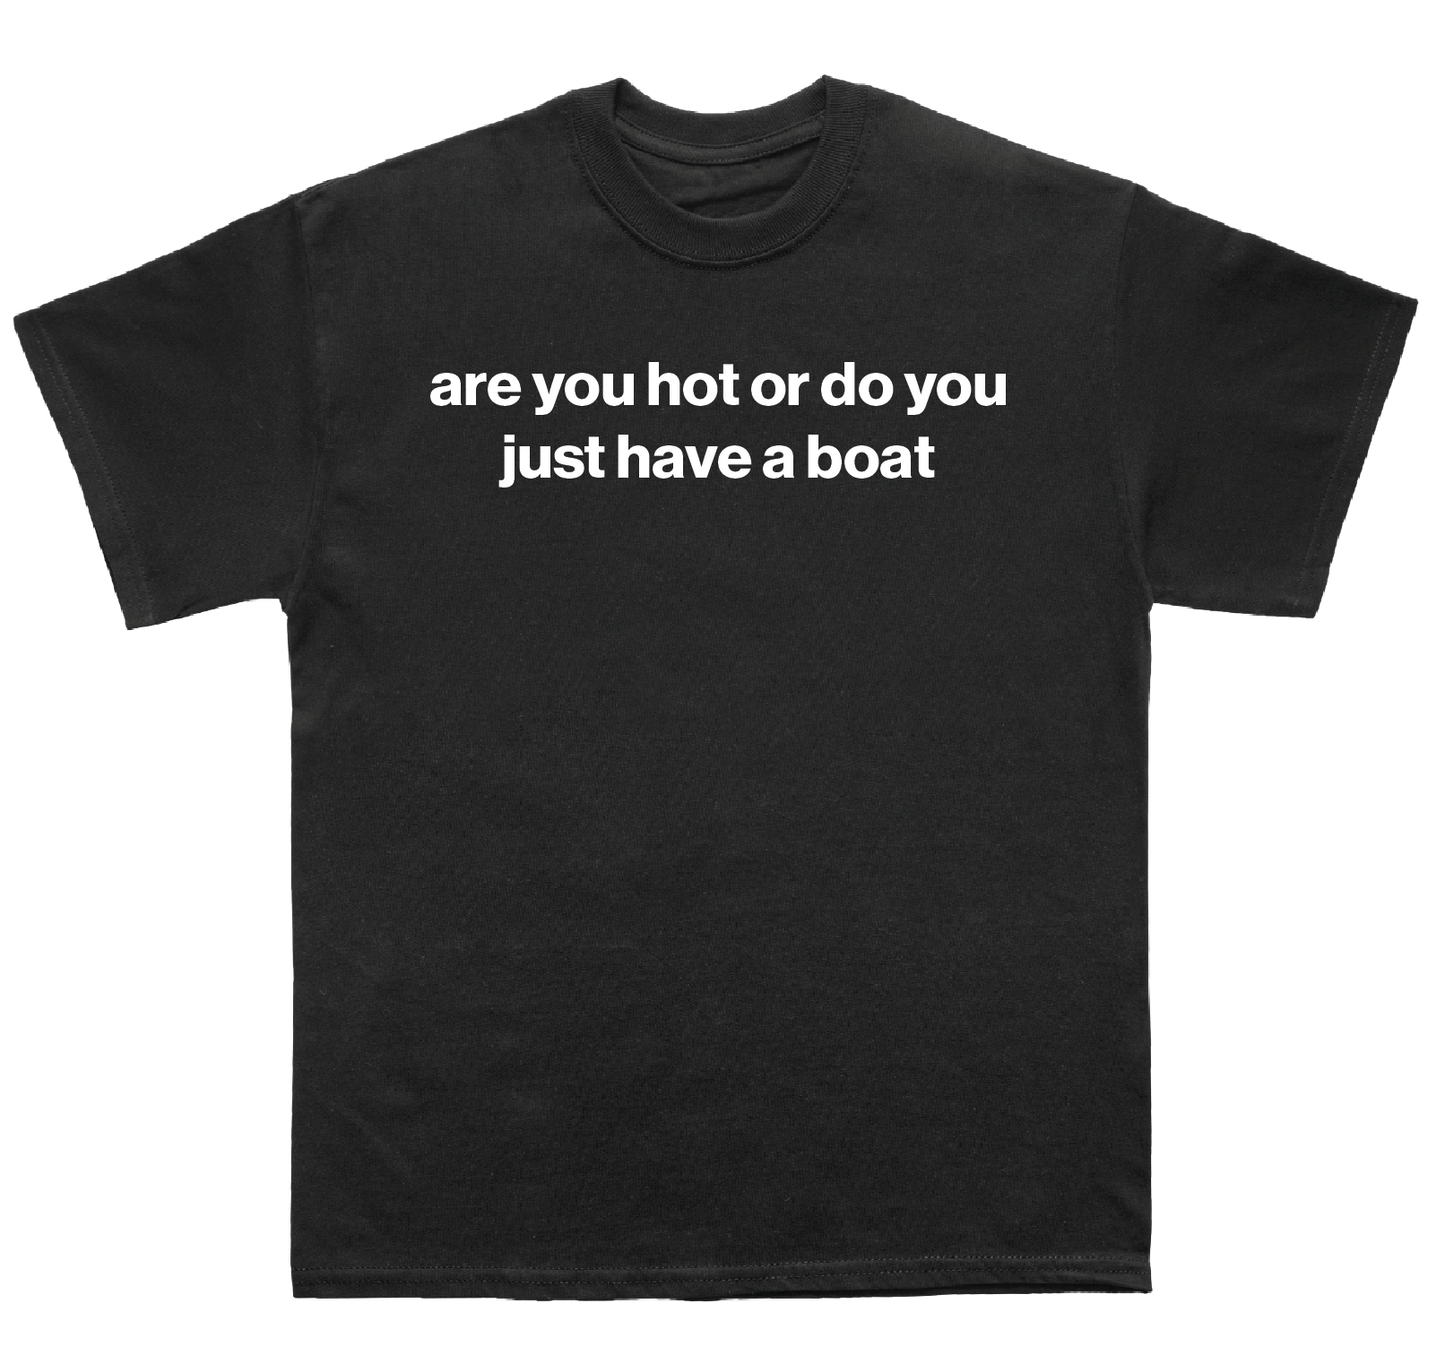 are you hot or do you just have a boat shirt